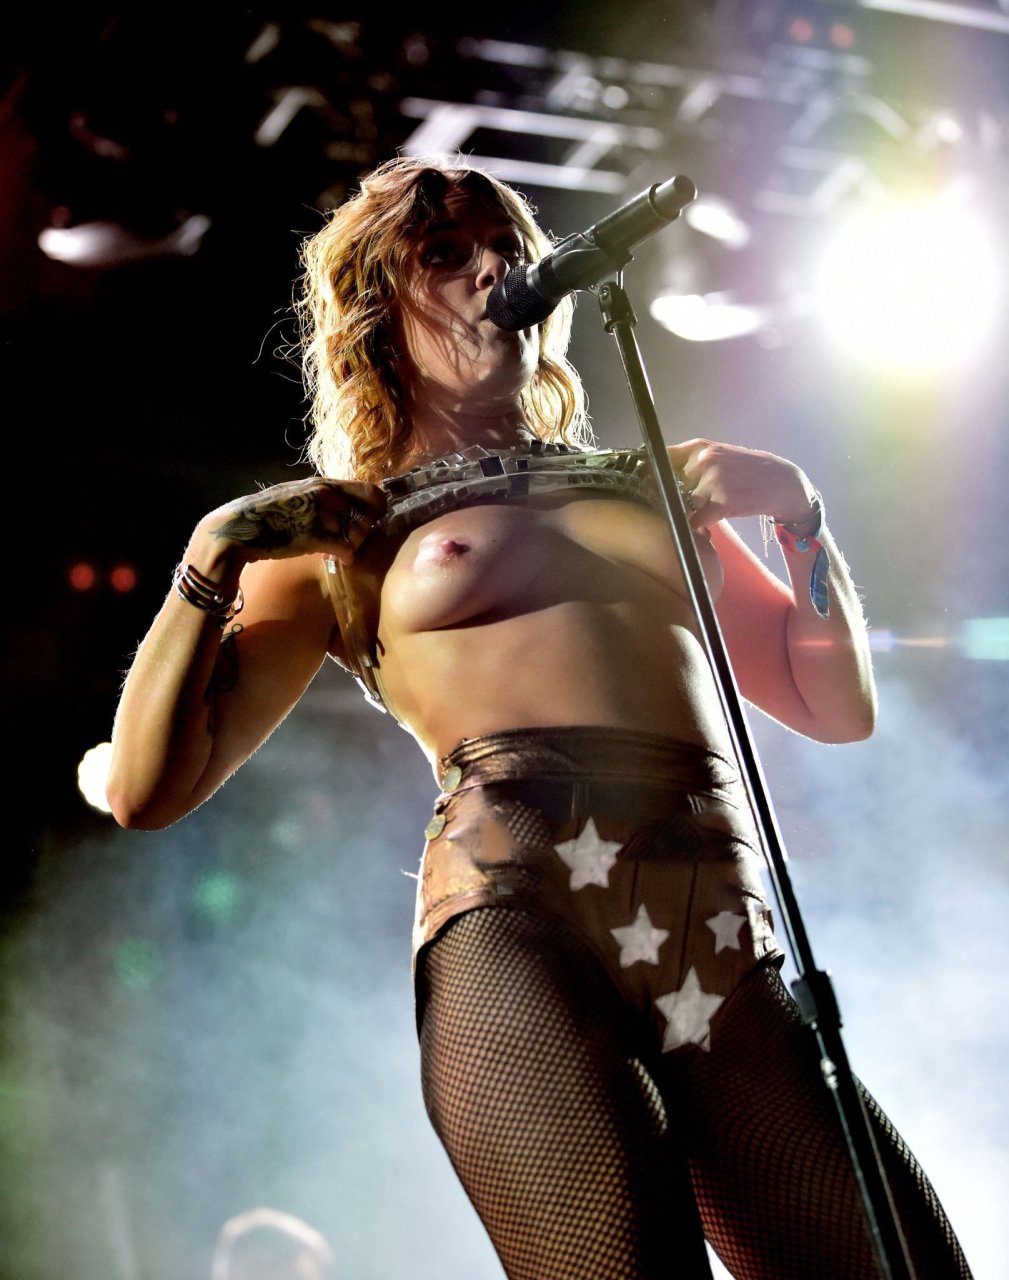 ToVelo Double Titties Nipples Flash During A Concert In Boston, MA.